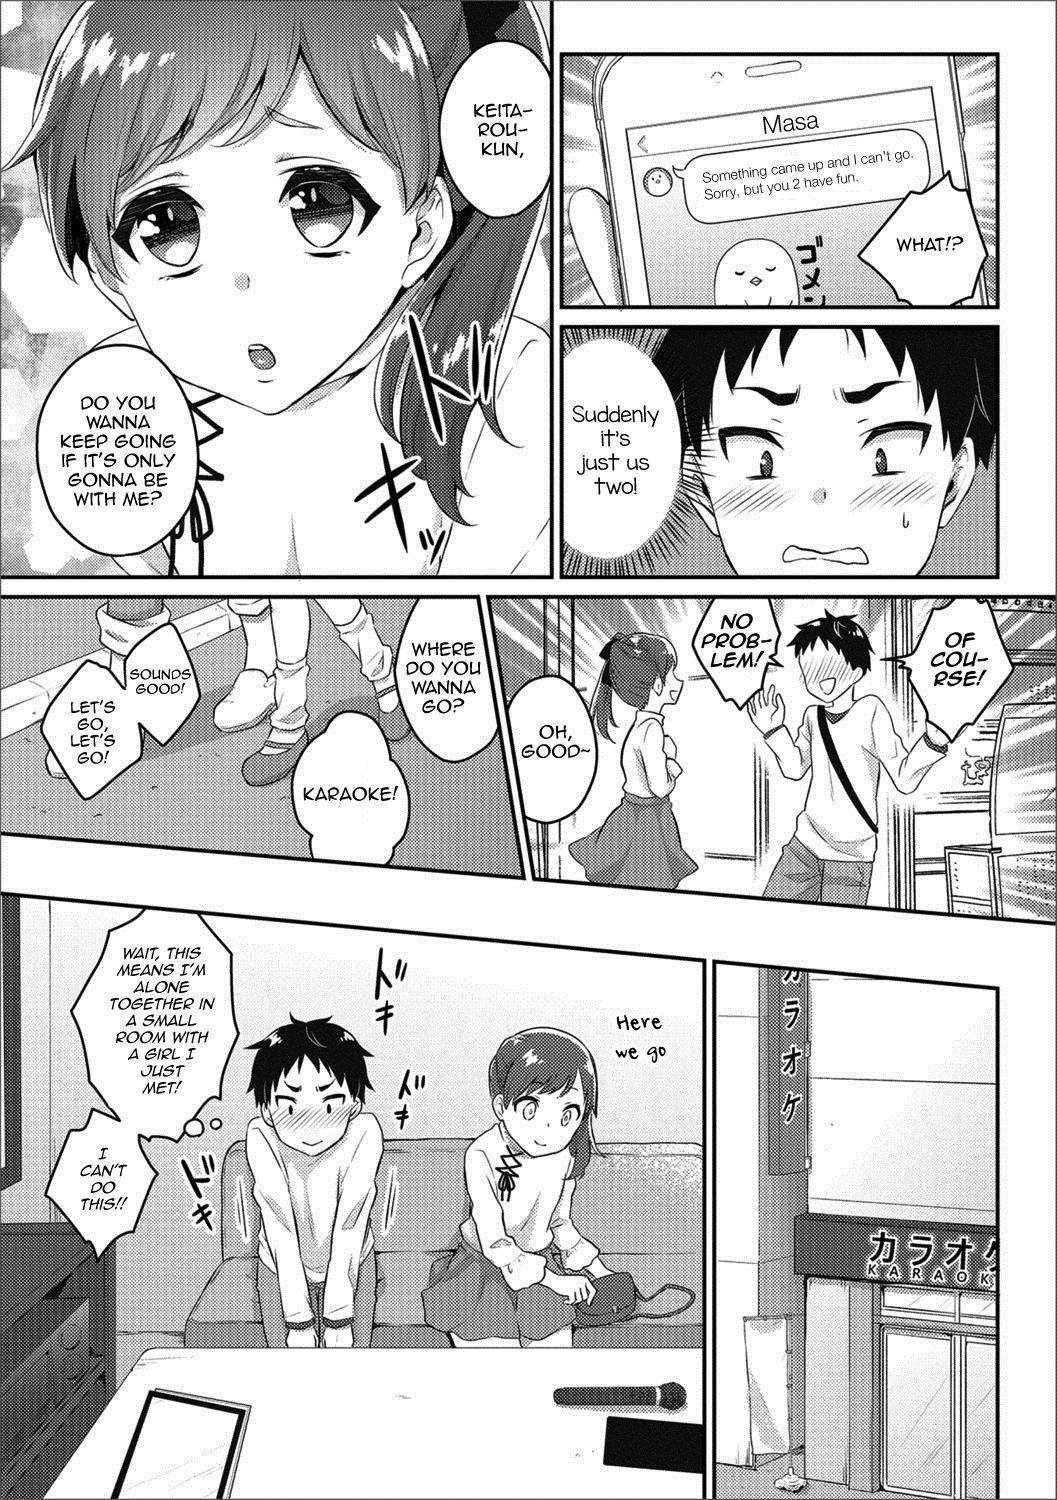 Sharing Risou no Kanojo♂ Point Of View - Page 3